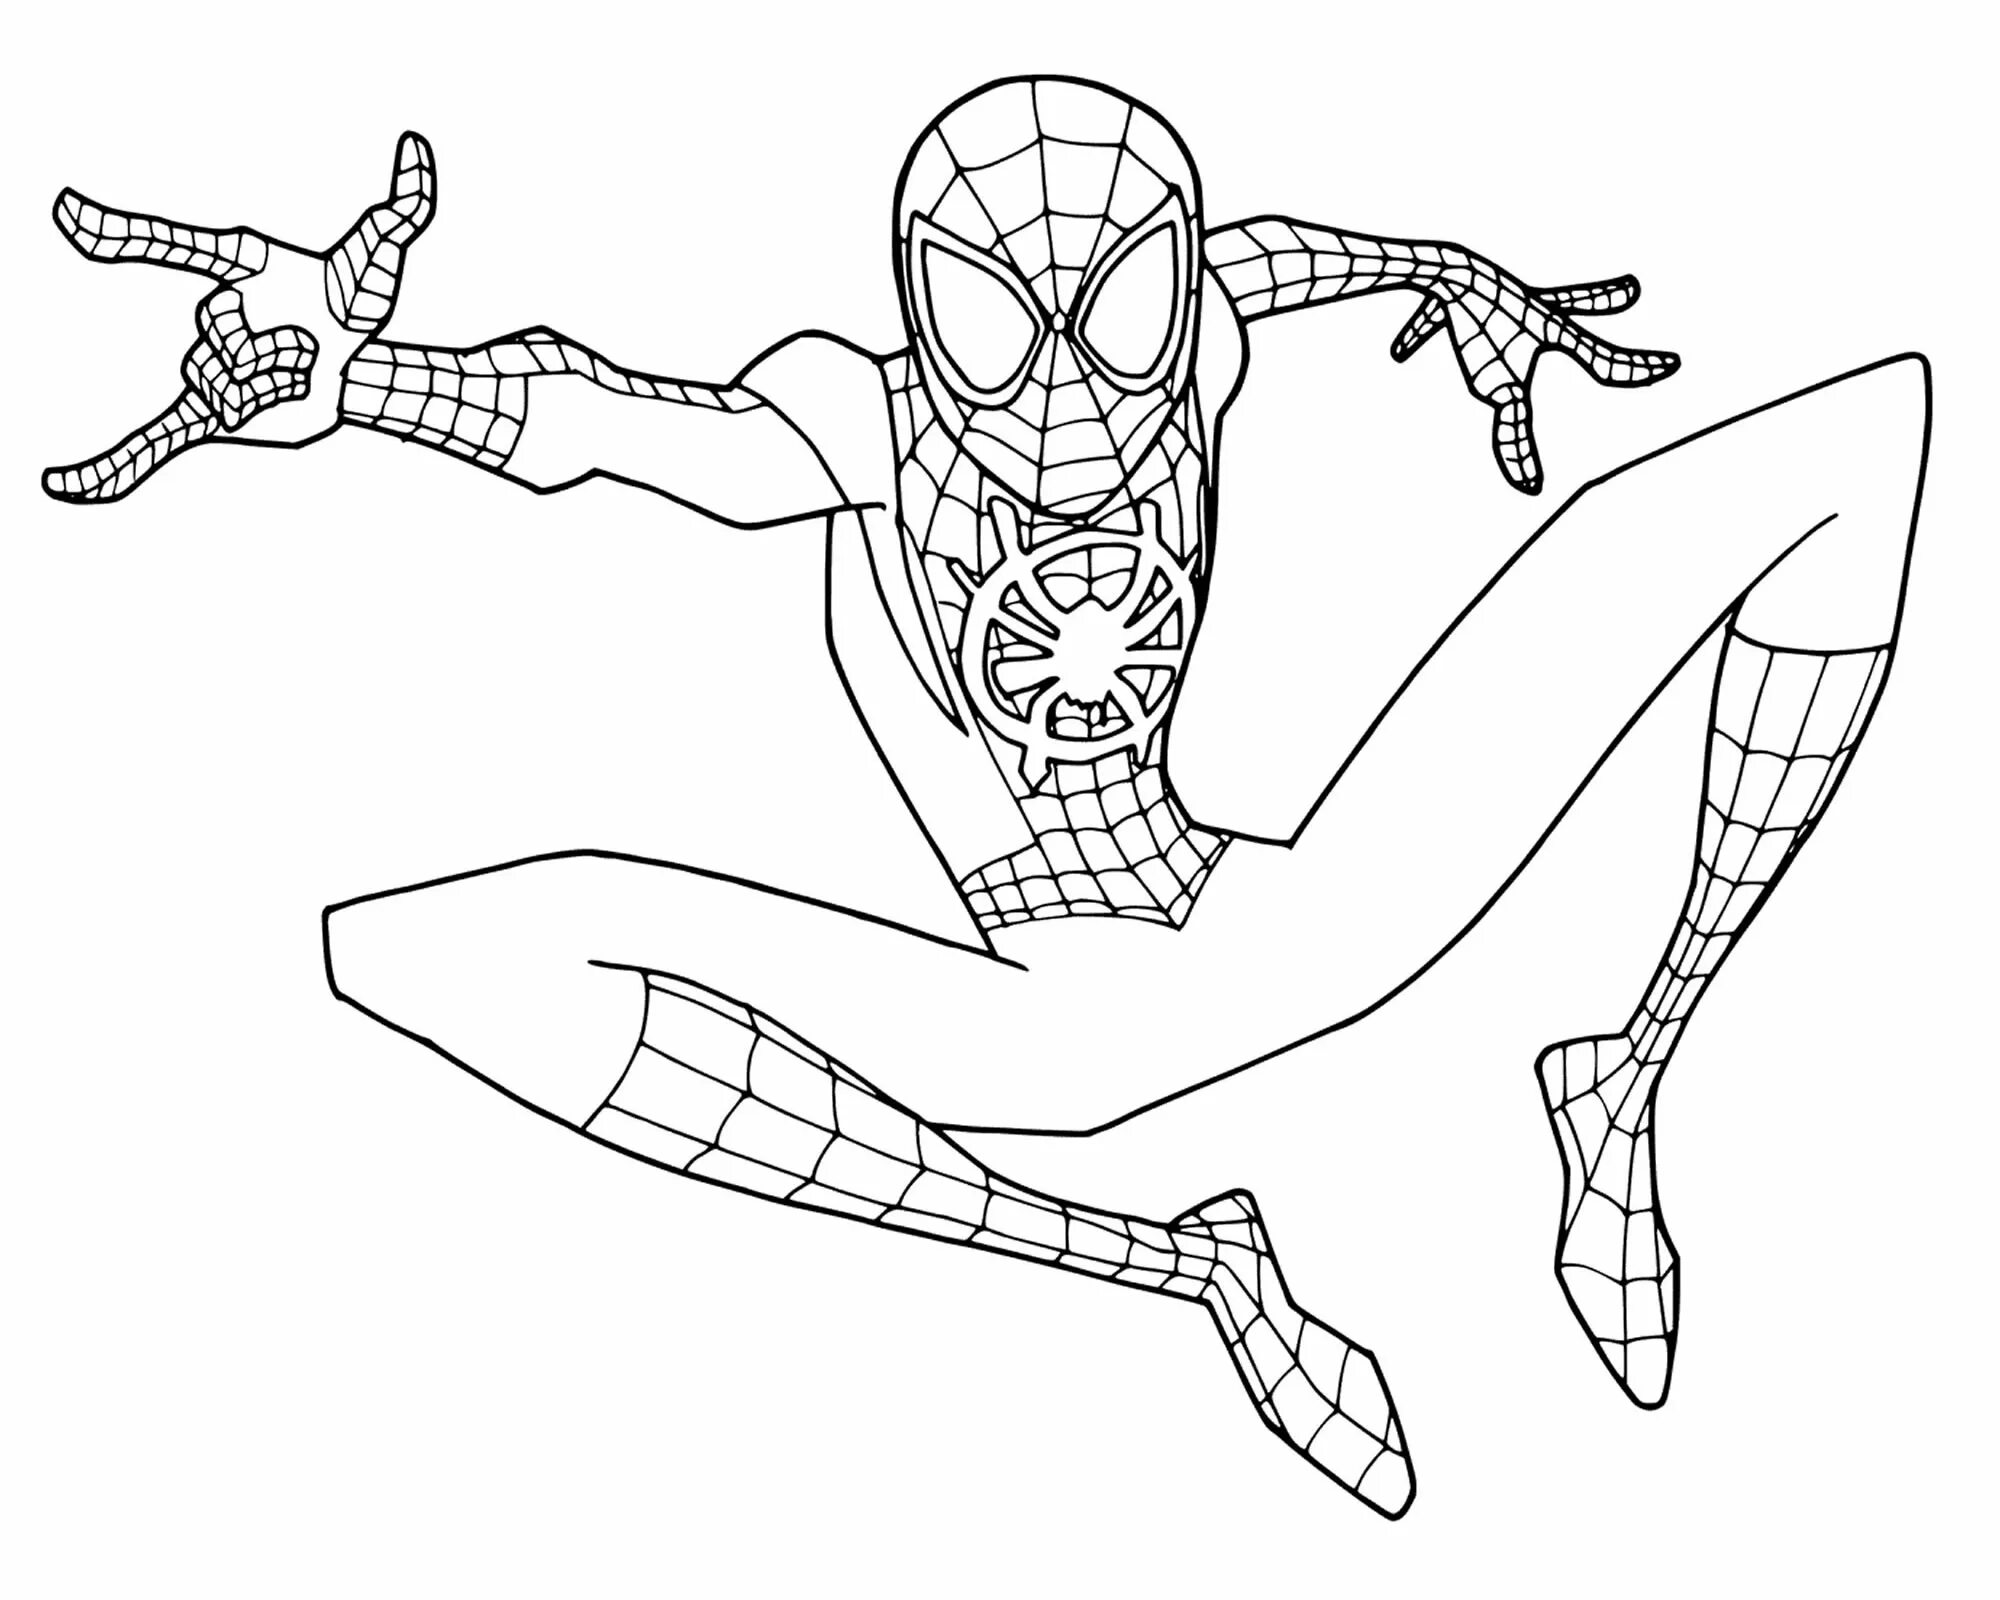 Exclusively crafted spiderman coloring book